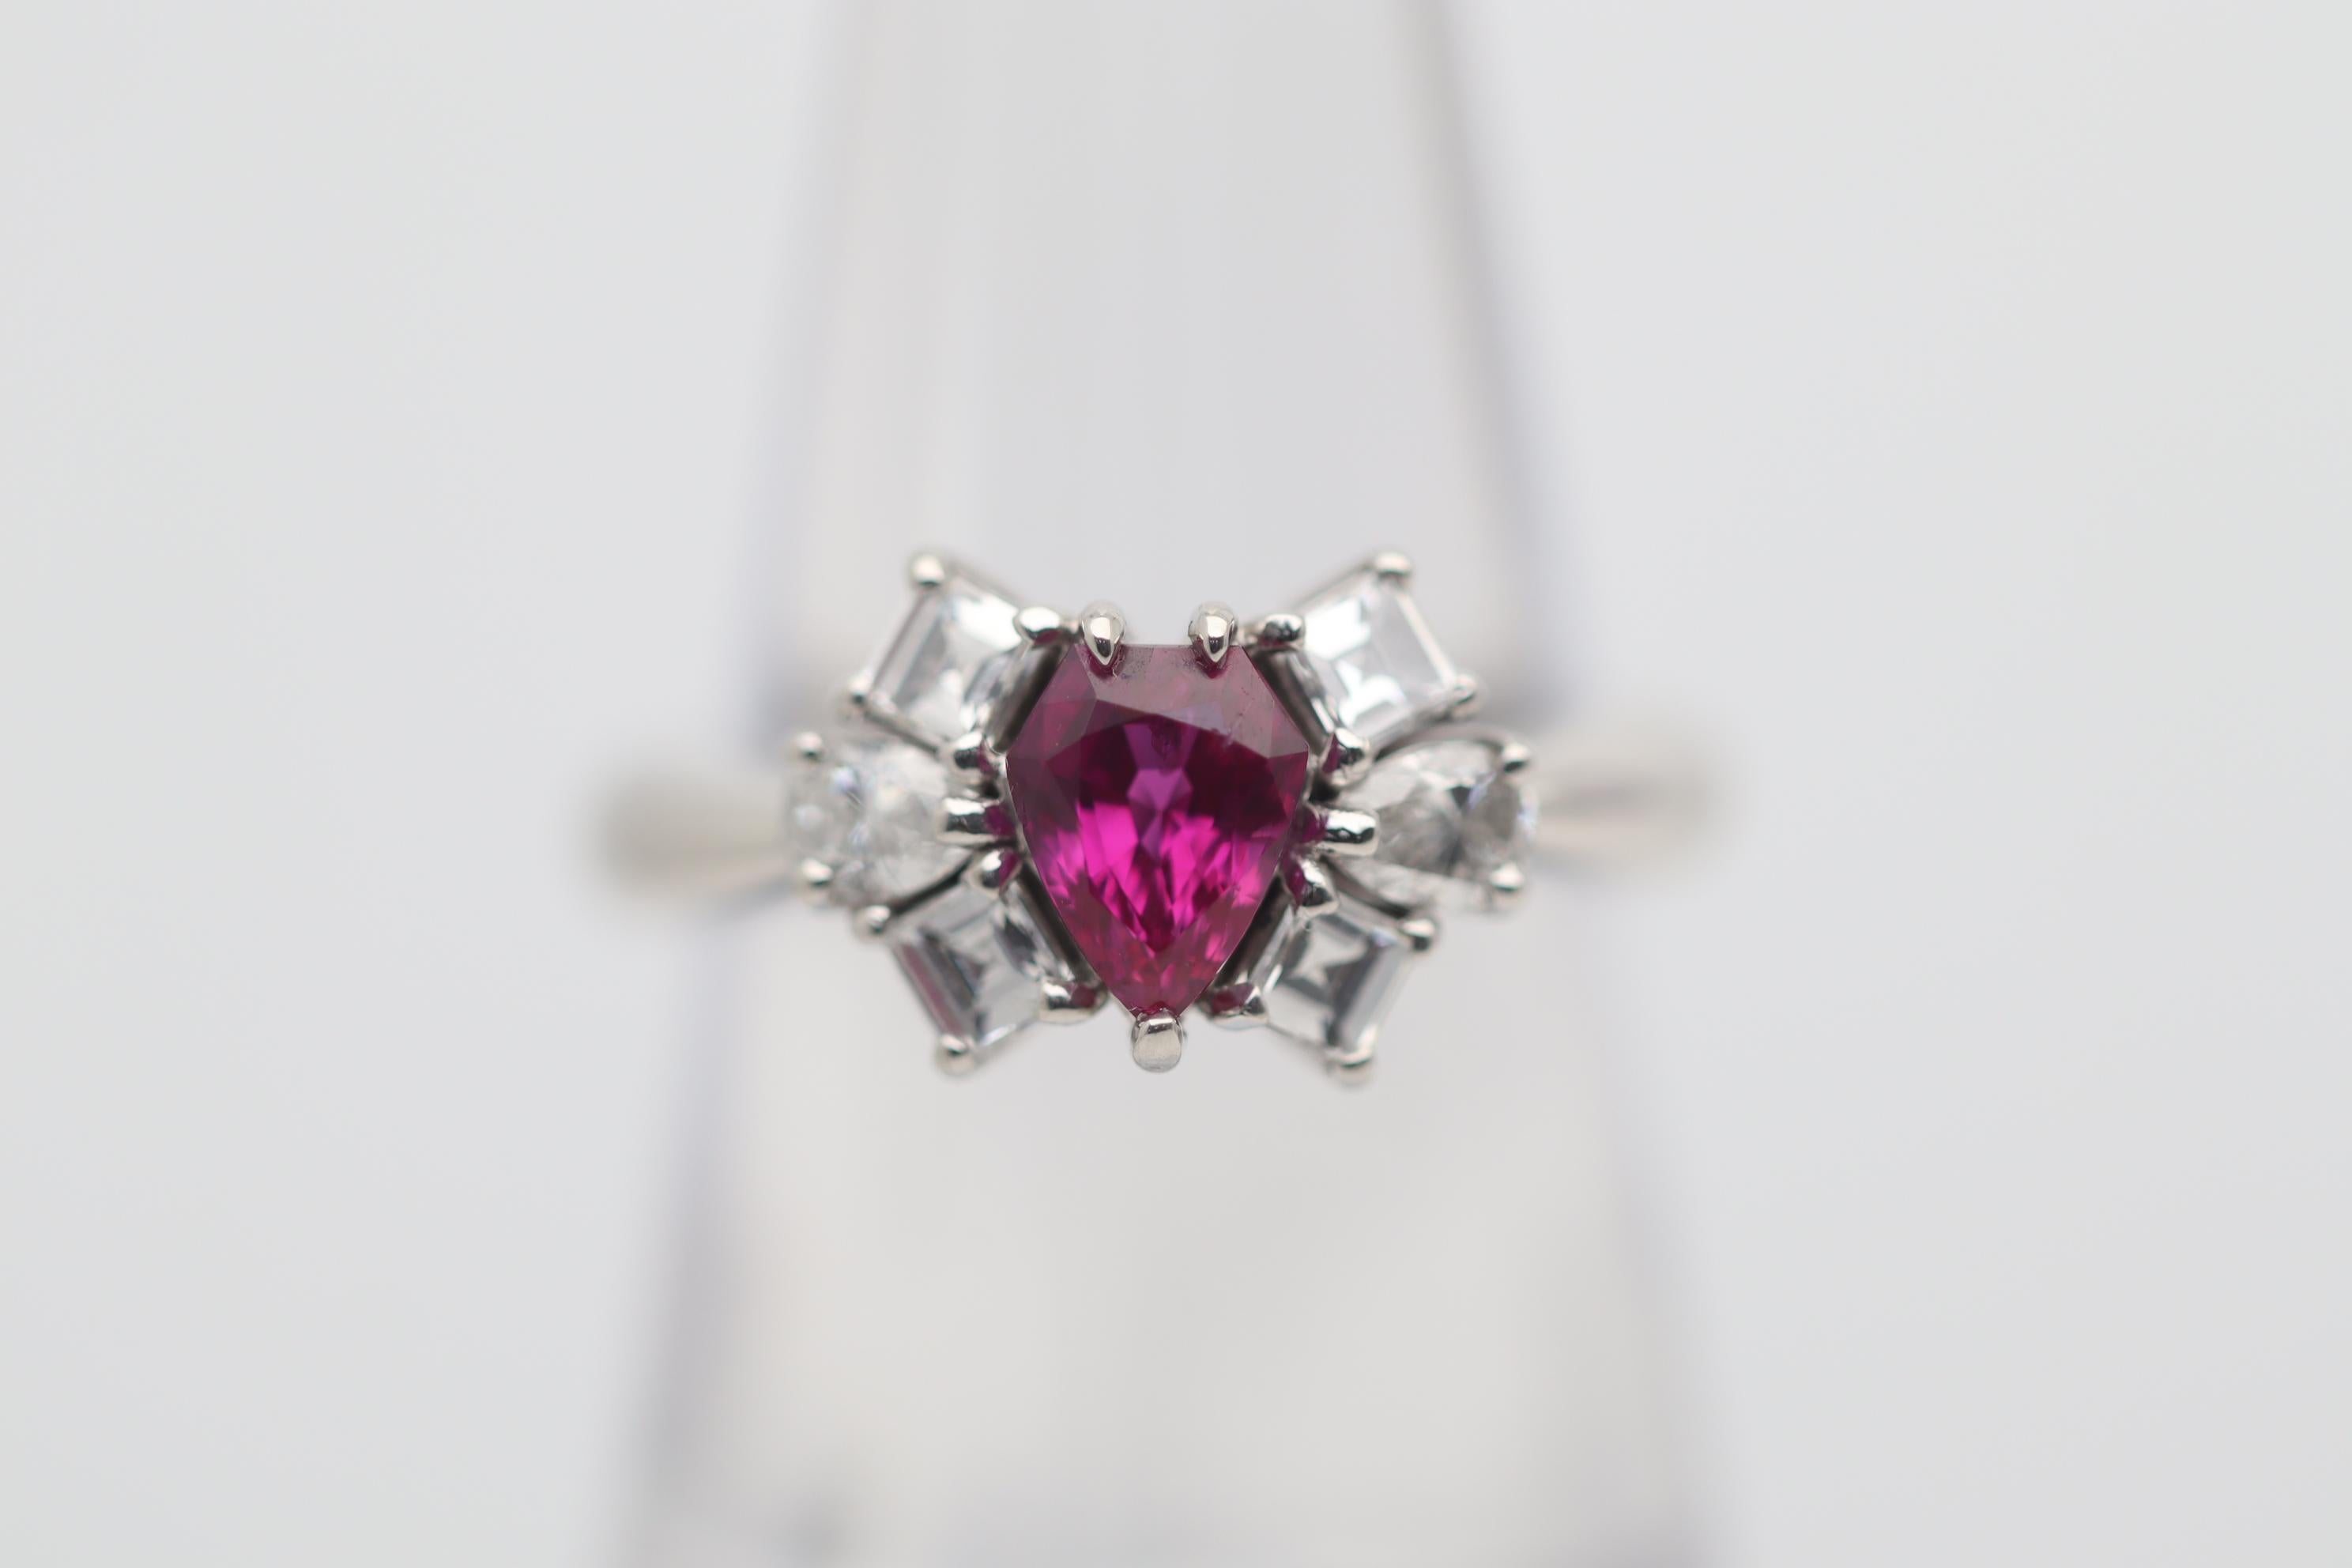 A stylish and chic ring featuring a 1.03 carat ruby with a unique shield-cut. The ruby has a bright and brilliant slightly pinkish-red color which is full of light and sparkle. The shield-cut is rarely used for rubies and other fine colored stones